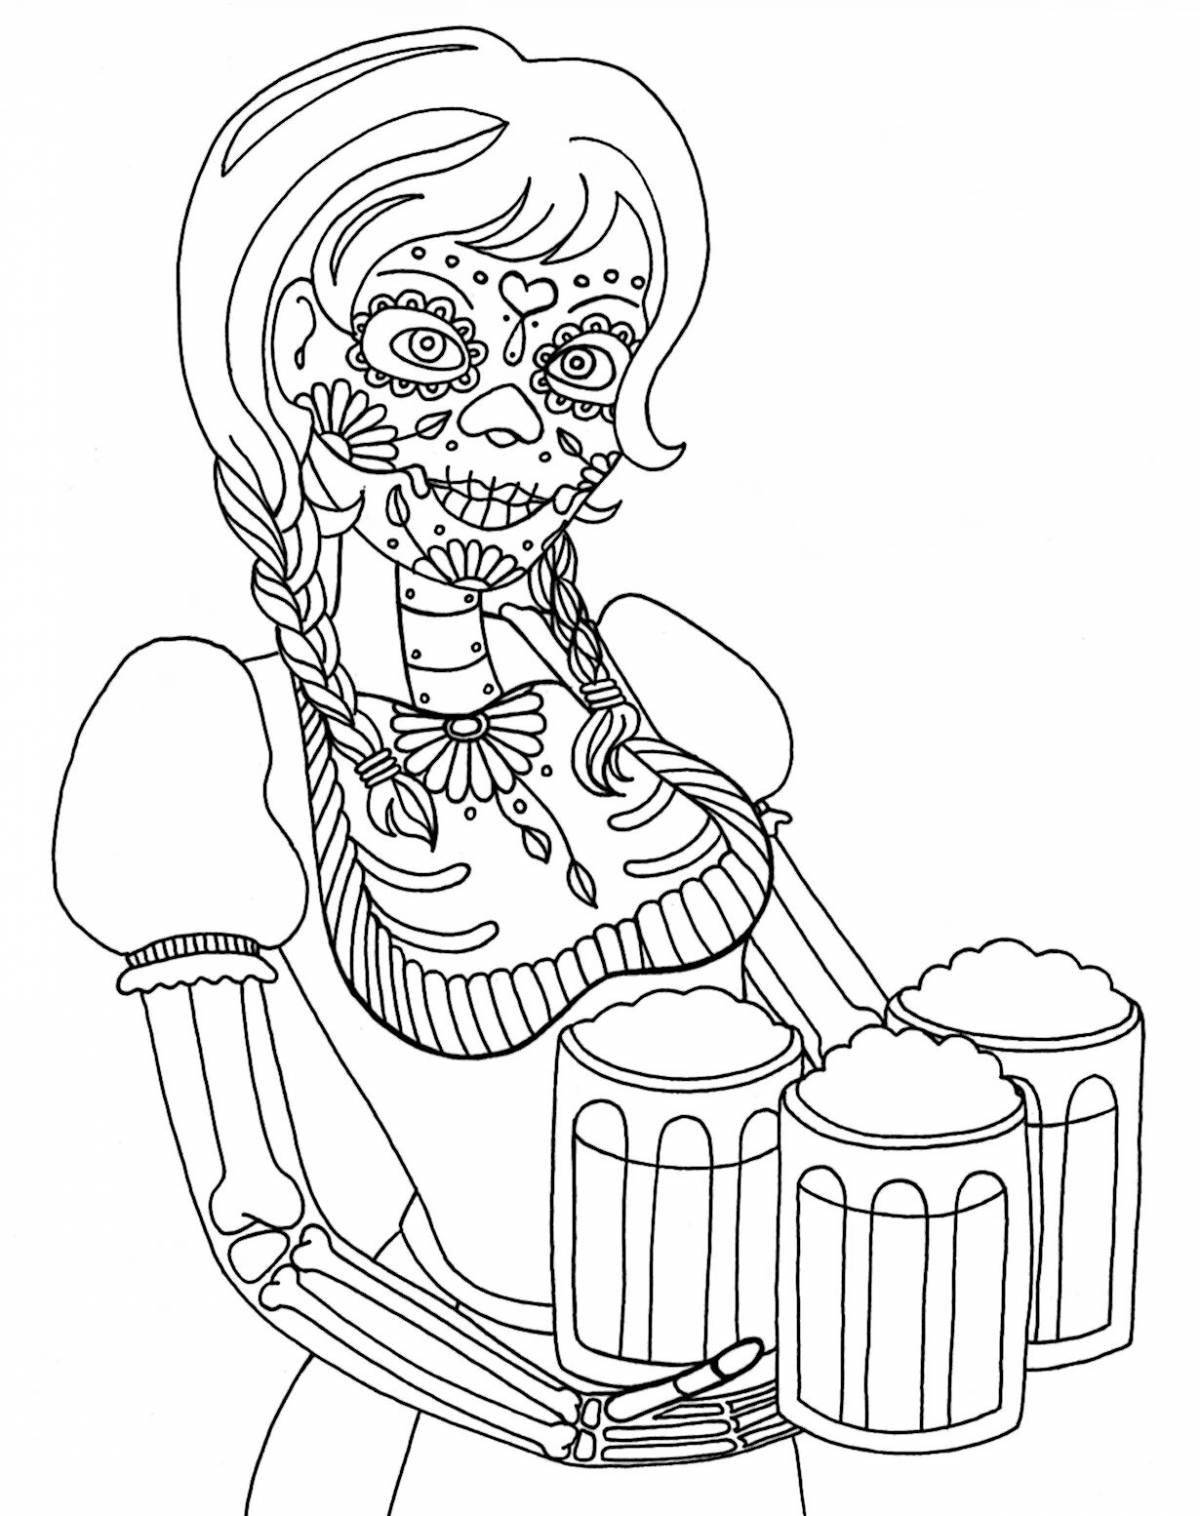 Coloring book unpleasant and unspeakable horror